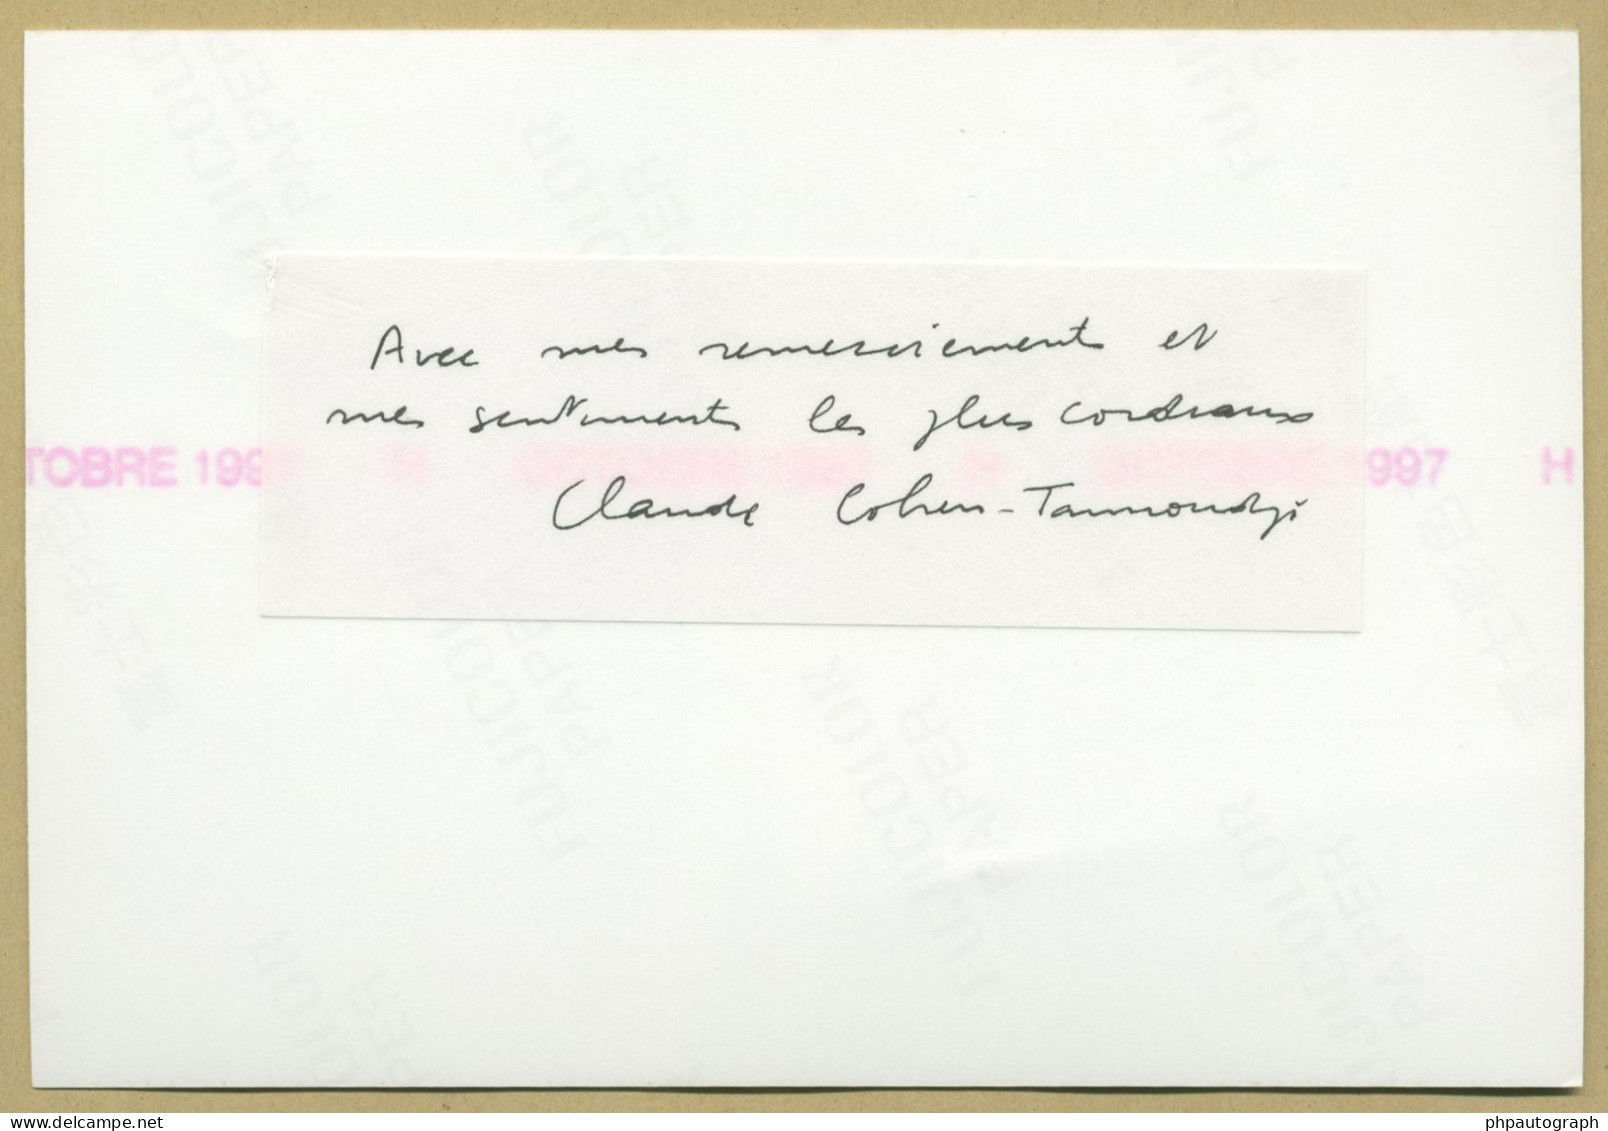 Claude Cohen-Tannoudji - French Physicist - Back Signed Photo - Nobel Prize - Inventors & Scientists